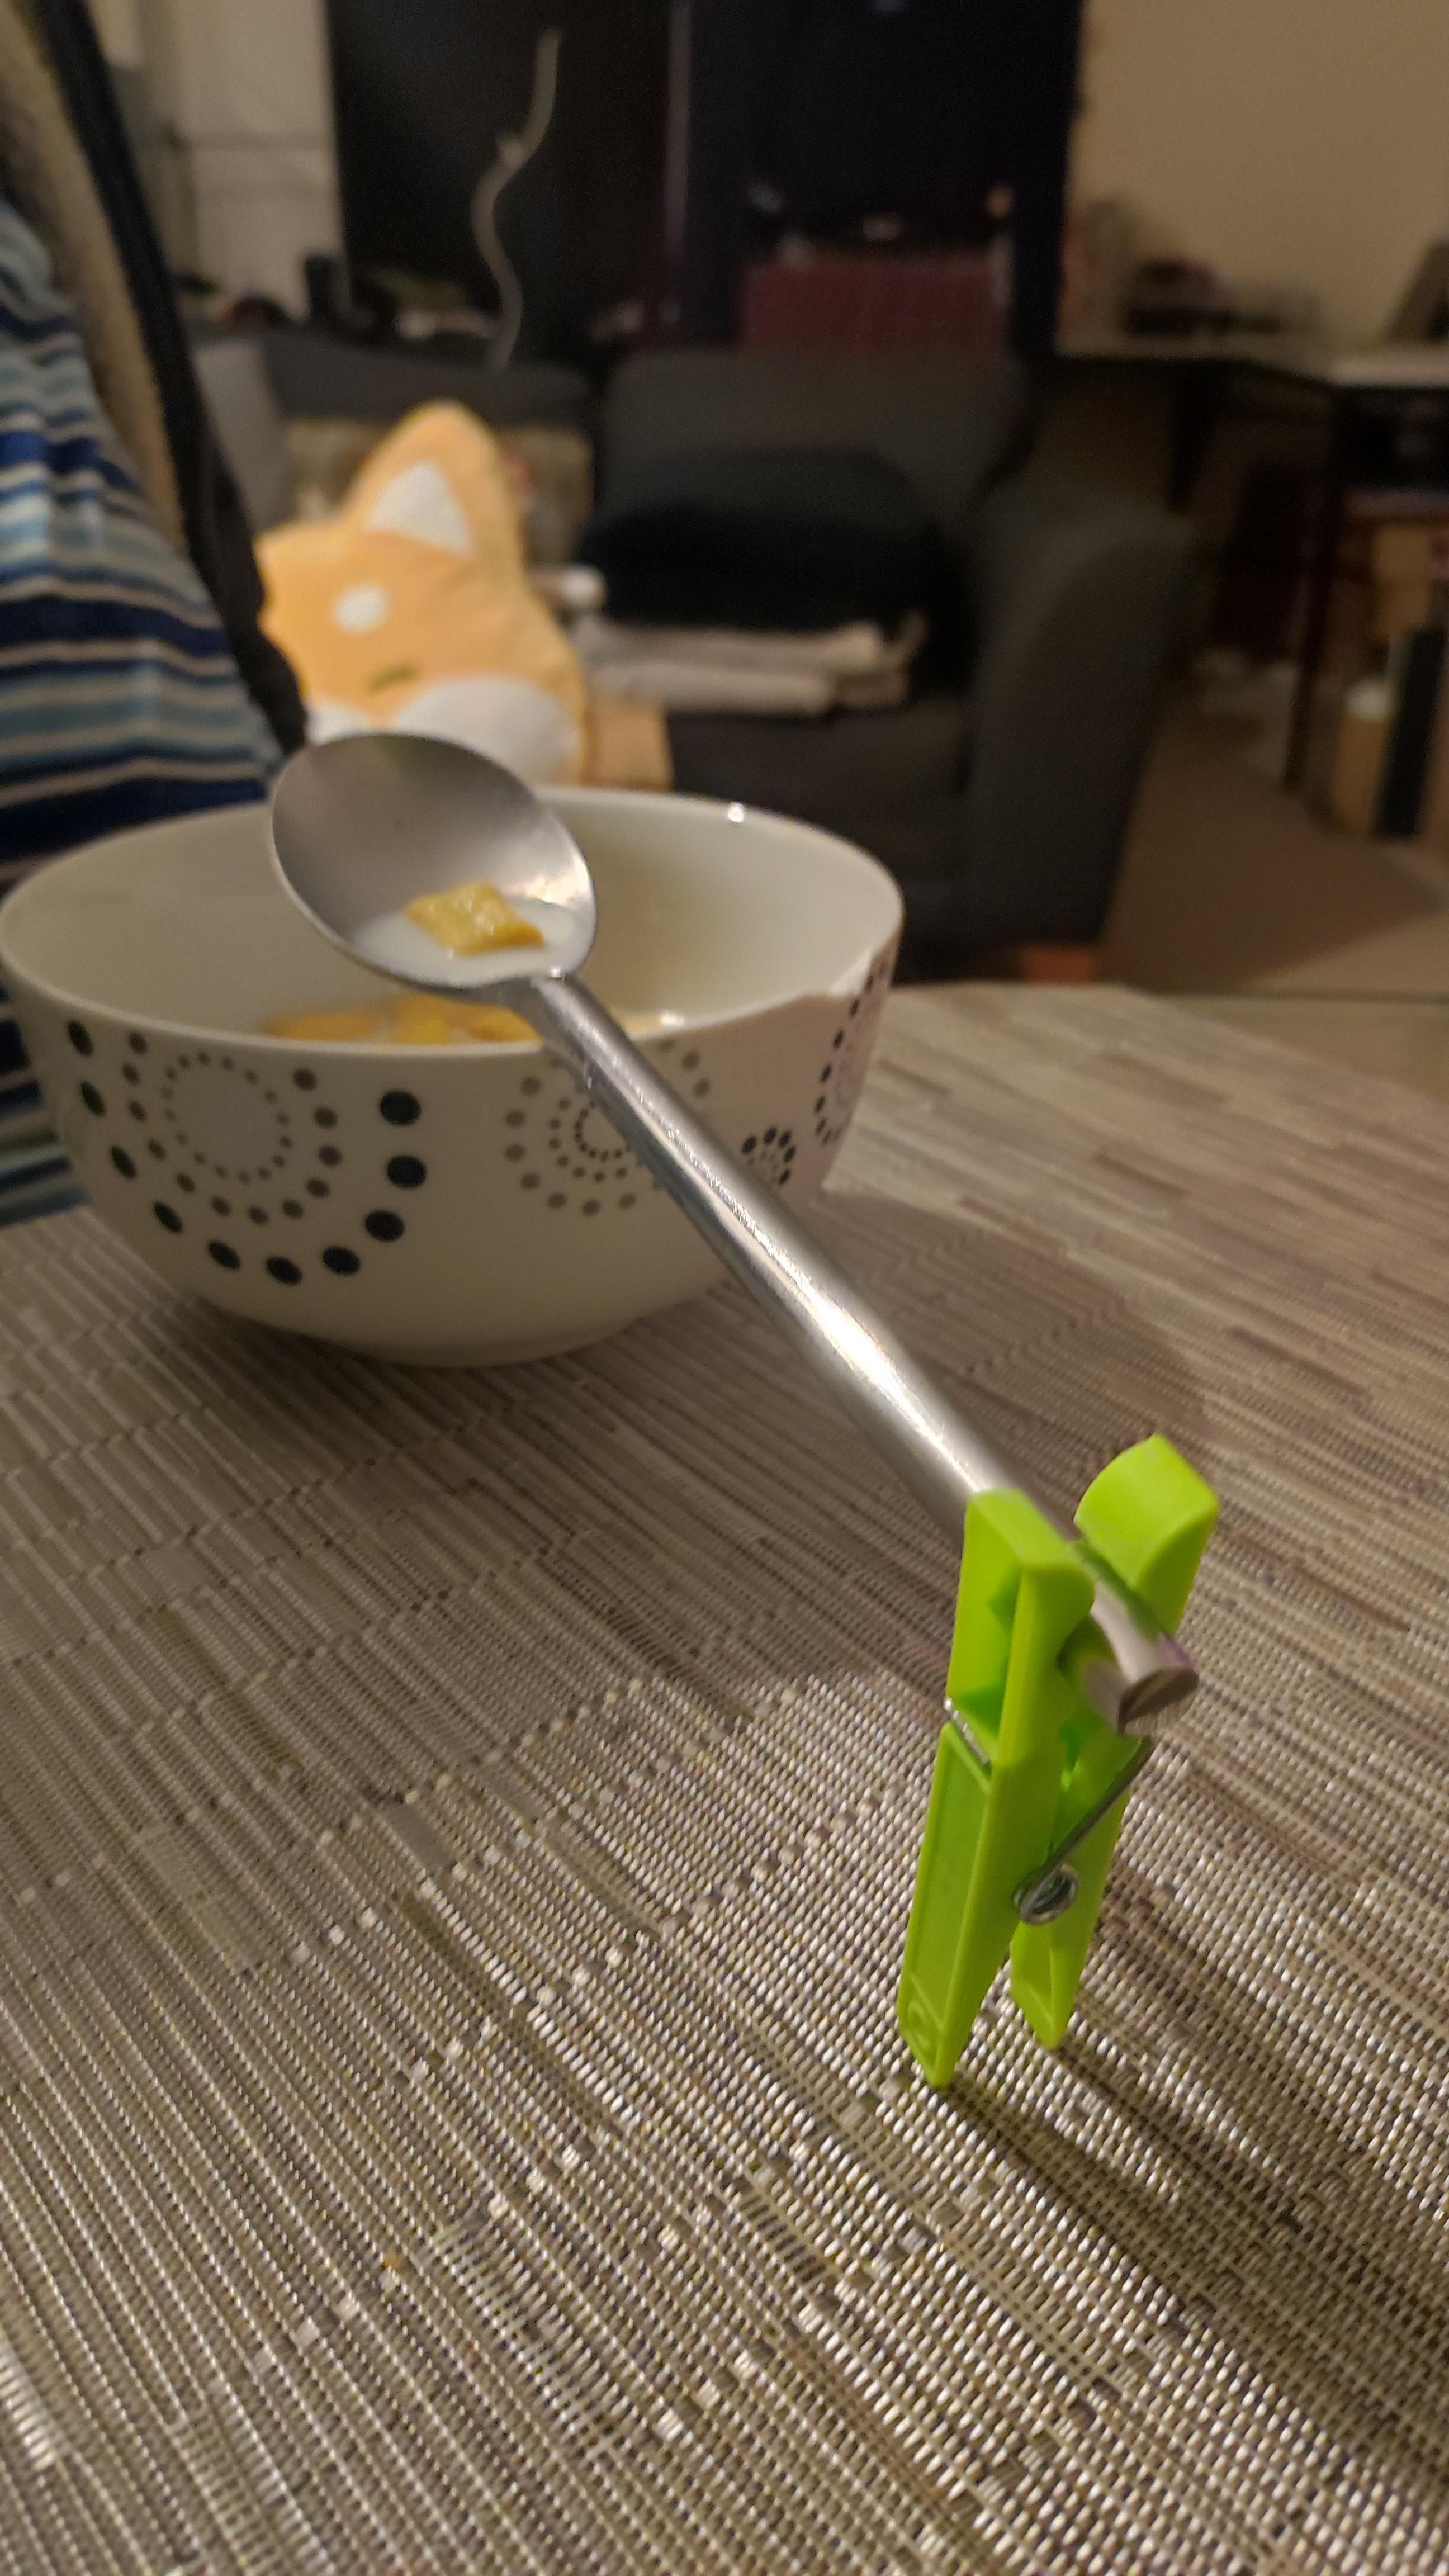 My bf solution to hold the spoon while he eats cereals